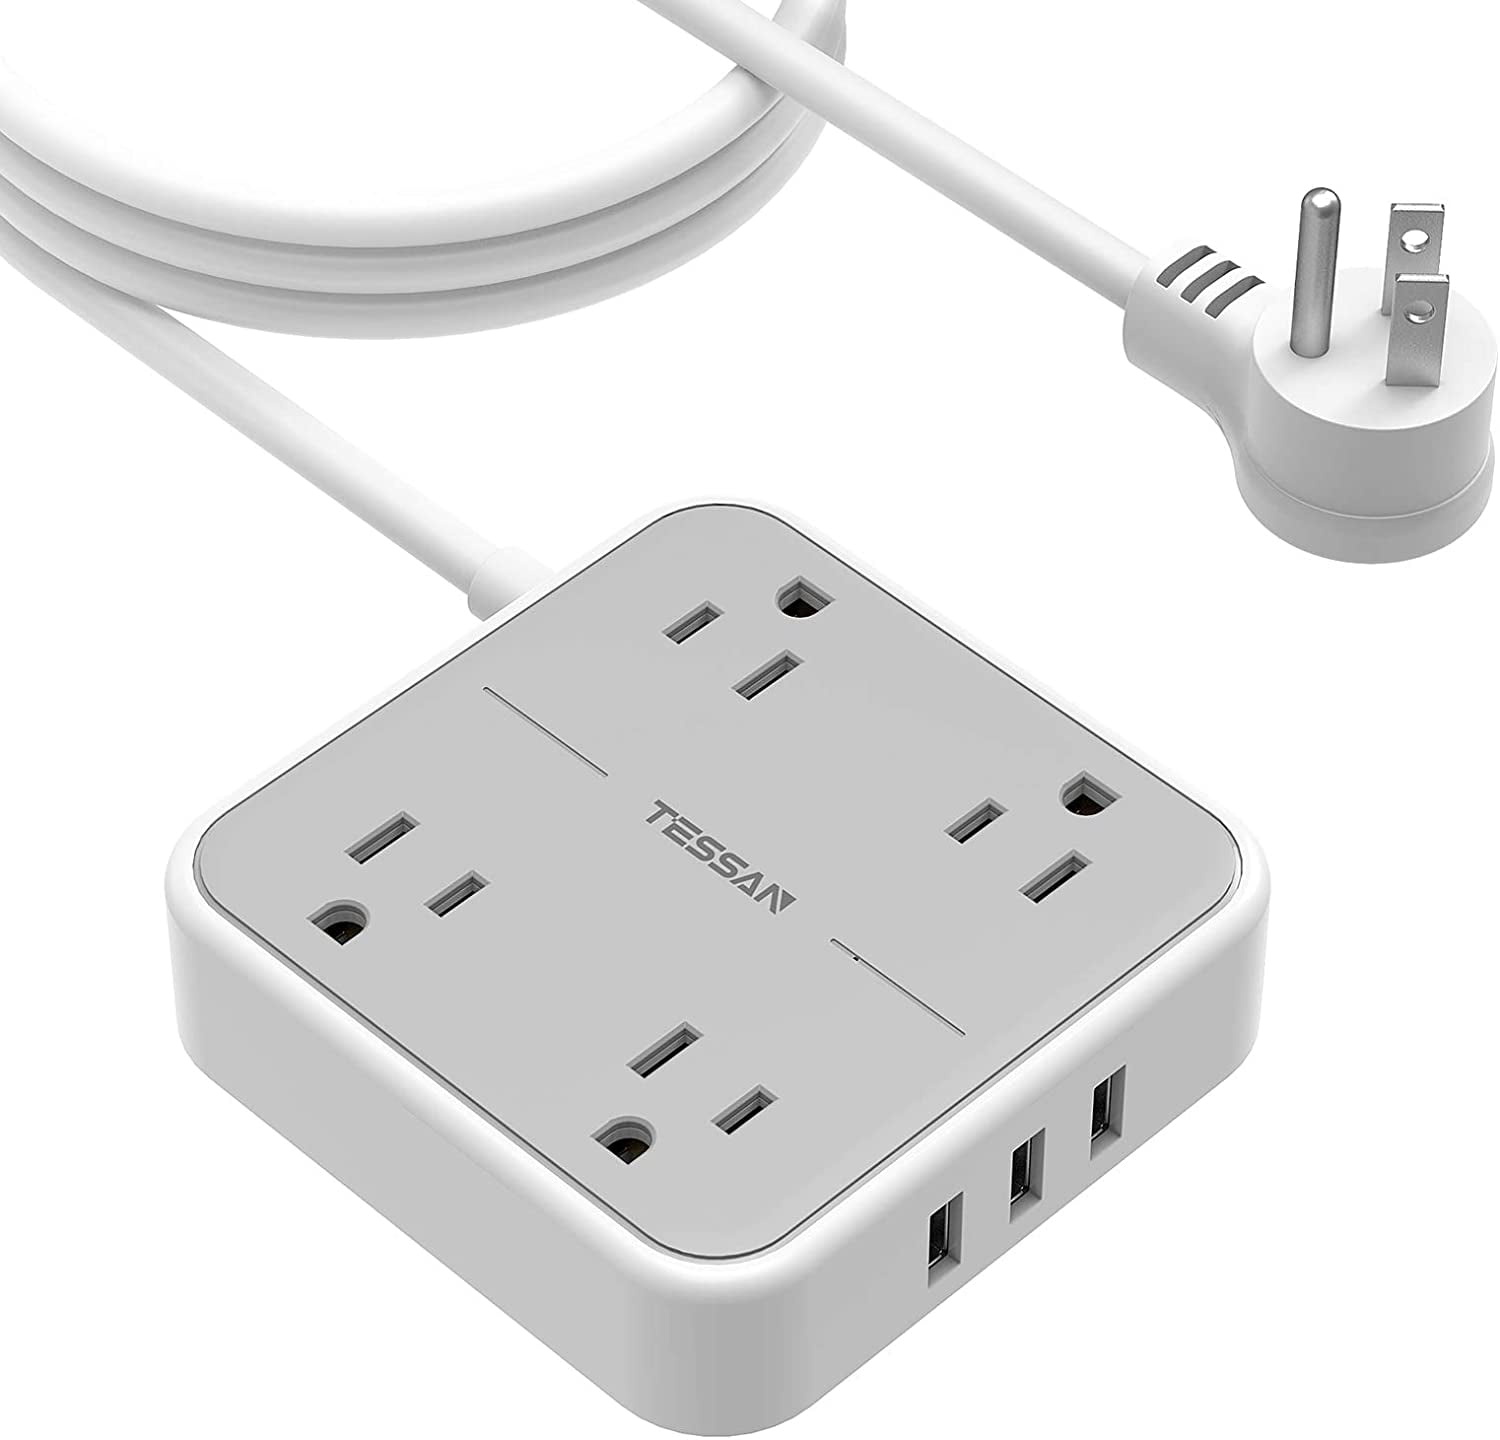 Flat Plug Power Strip with Long Extension Cord,4 Widely Spaced Outlets 3 USB